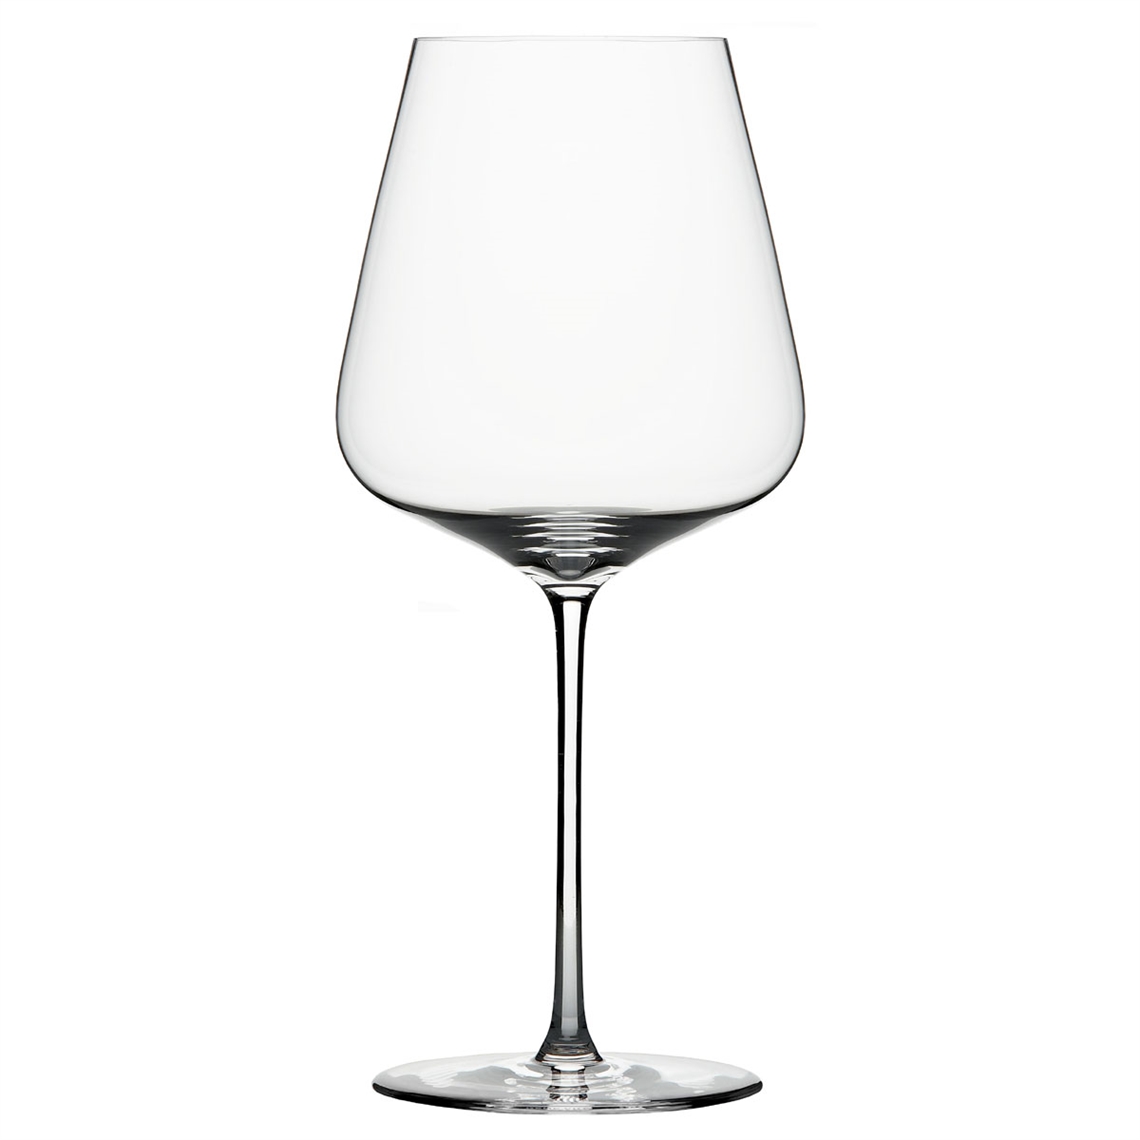 View more cocktail glasses from our Premium Mouth Blown Glassware range